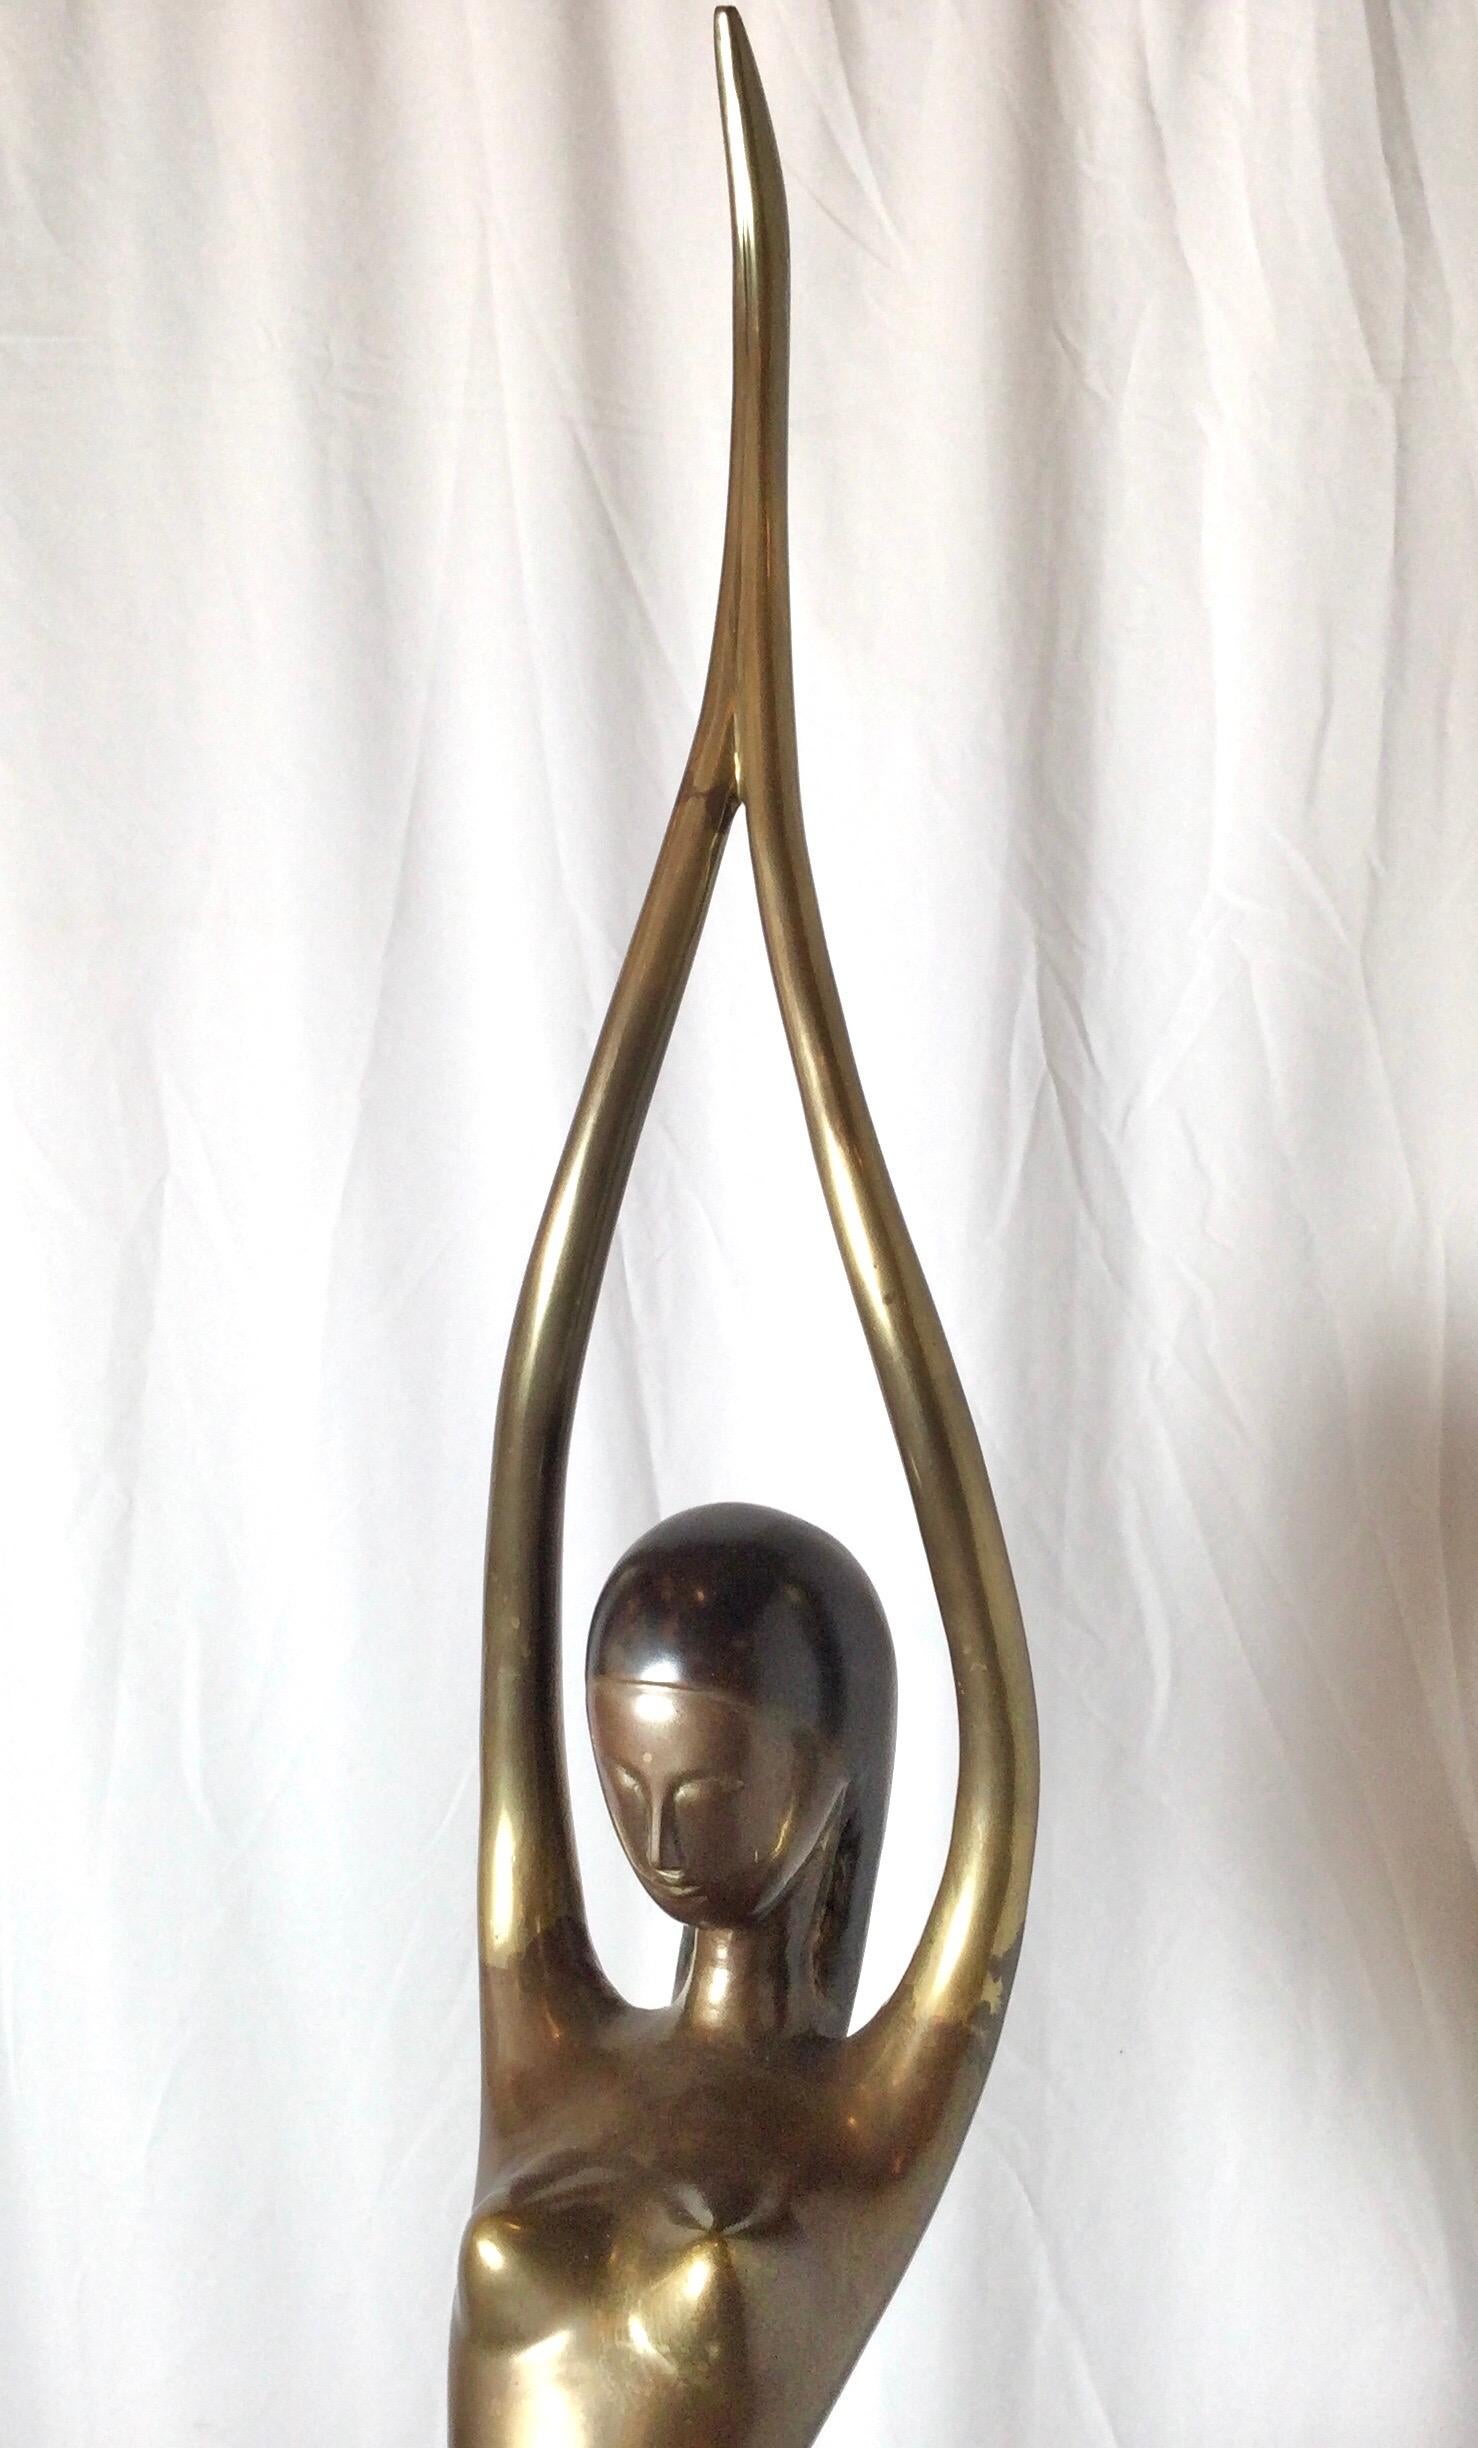 Art Deco style elongated brass sculpture of a standing woman with arms above her head.